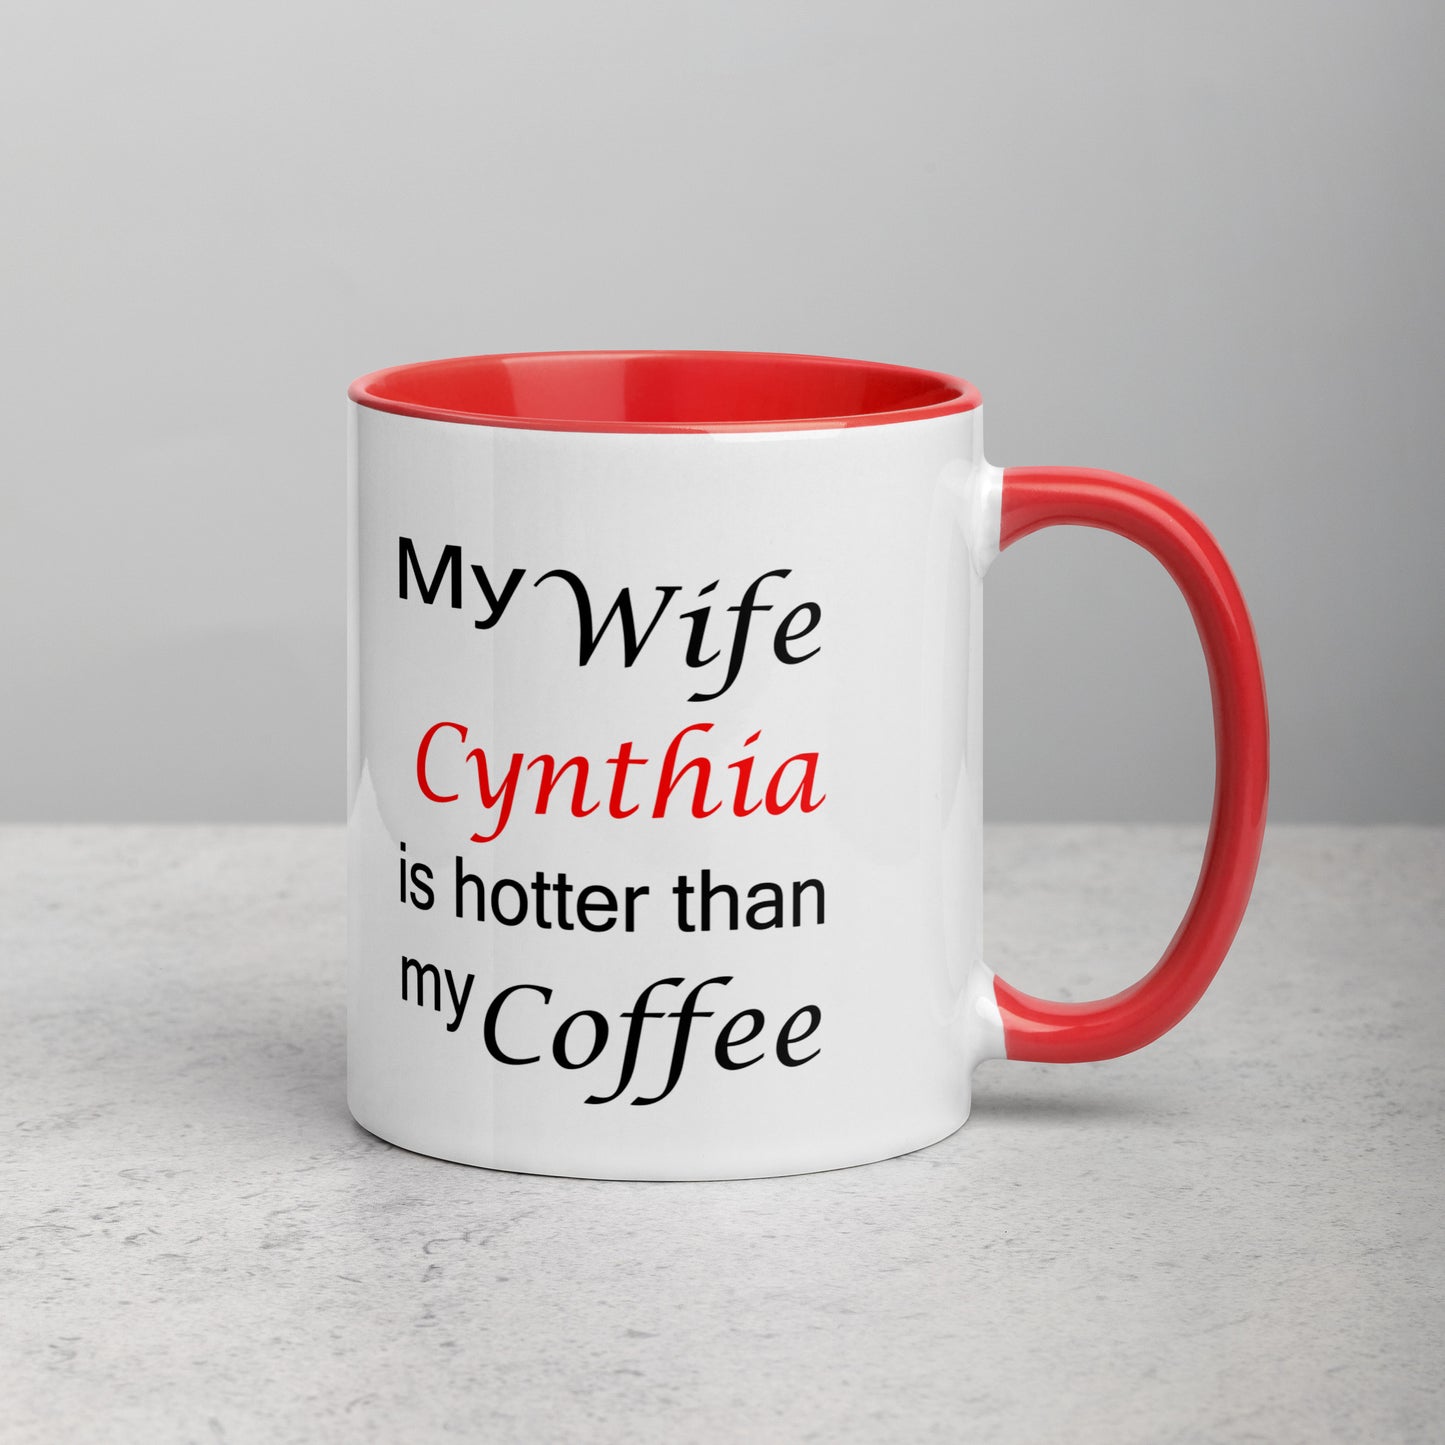 Personalized Mug with Color Inside